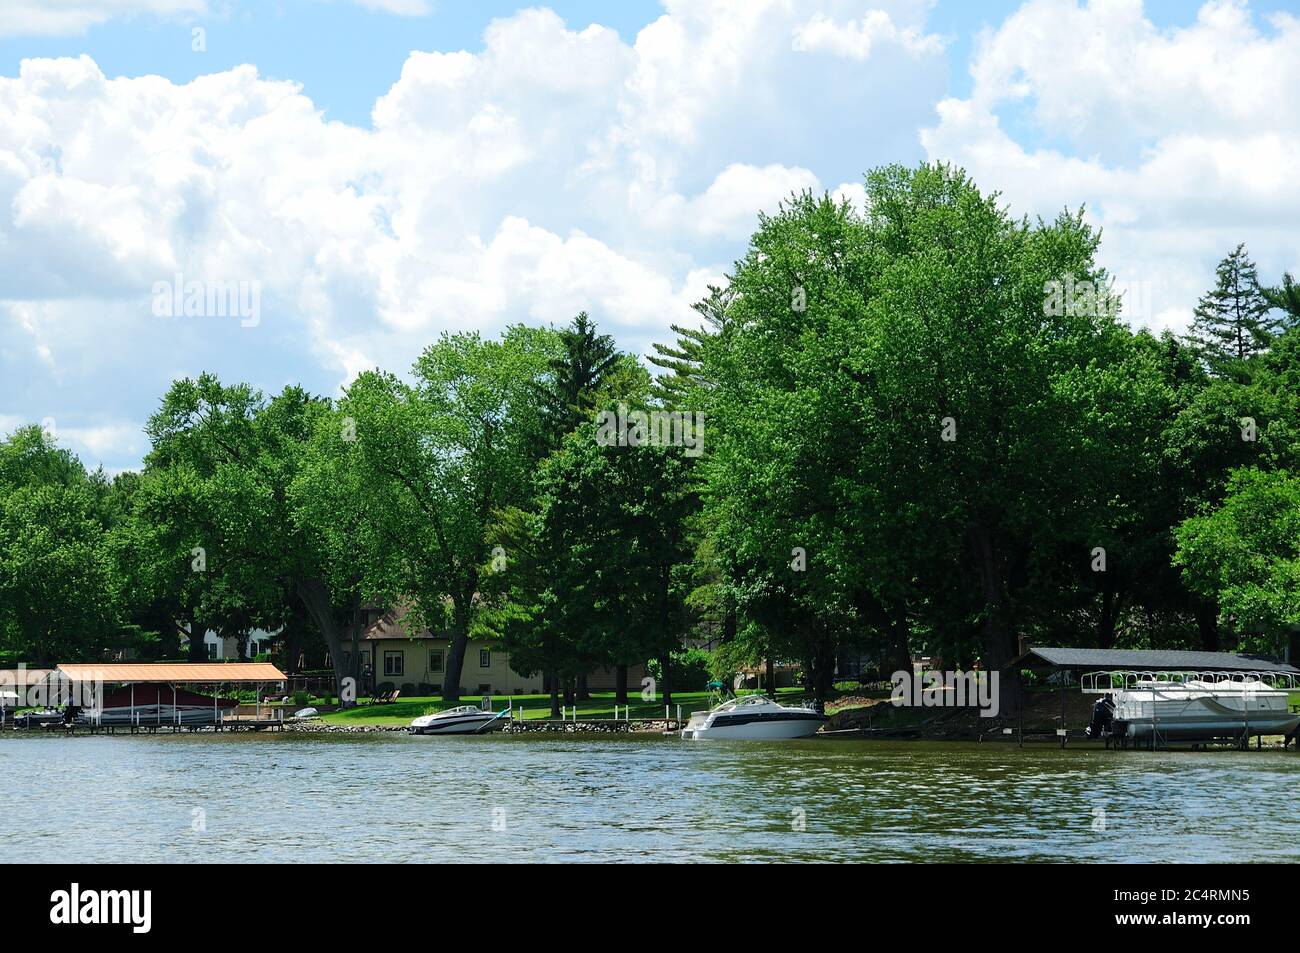 Boats and piers lining the shore of the Fox River in Northern Illinois, USA. Stock Photo